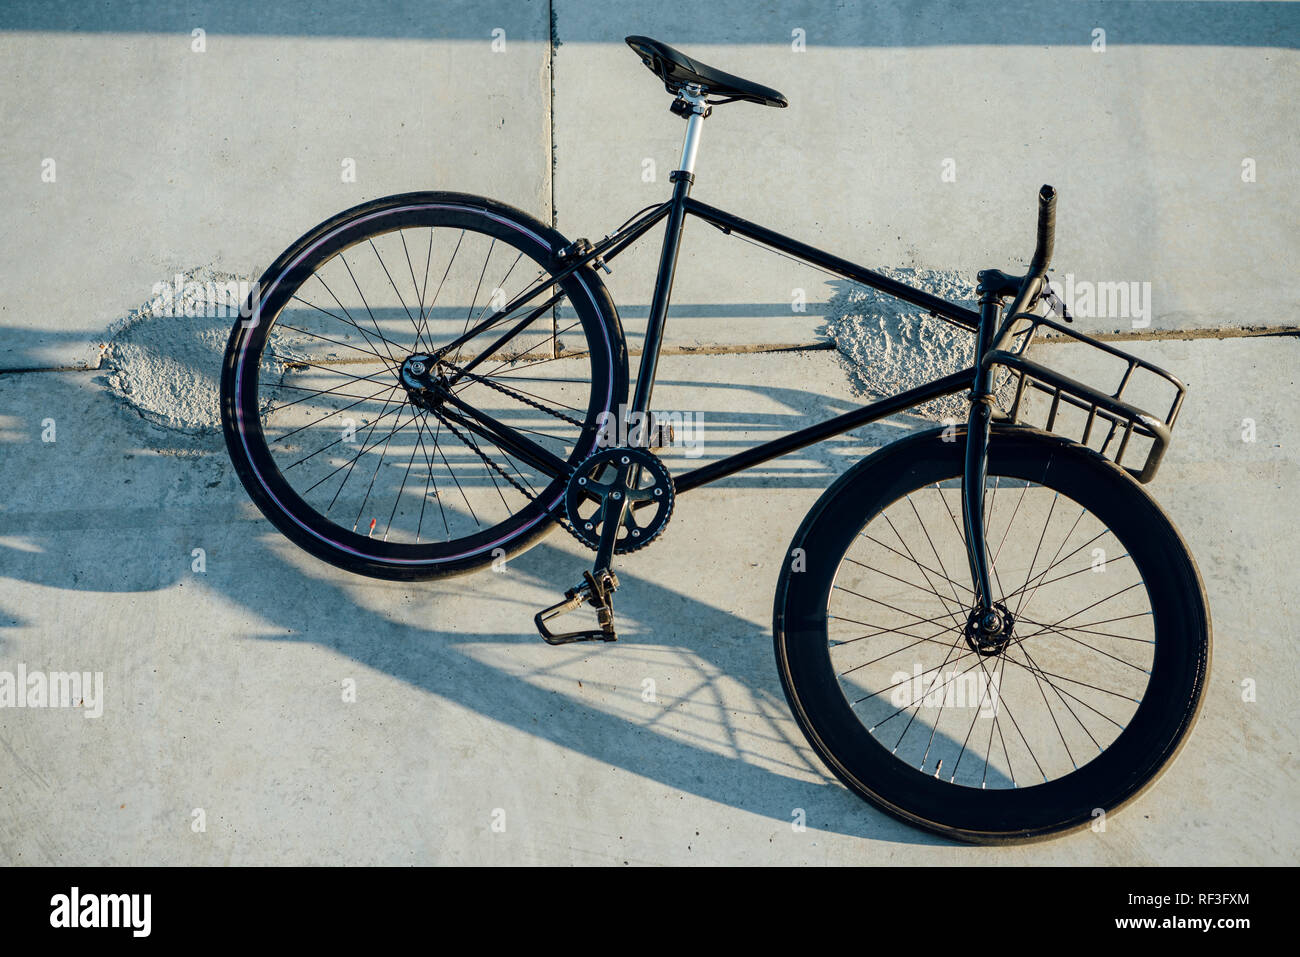 Fixie Bike High Resolution Stock Photography and Images - Alamy